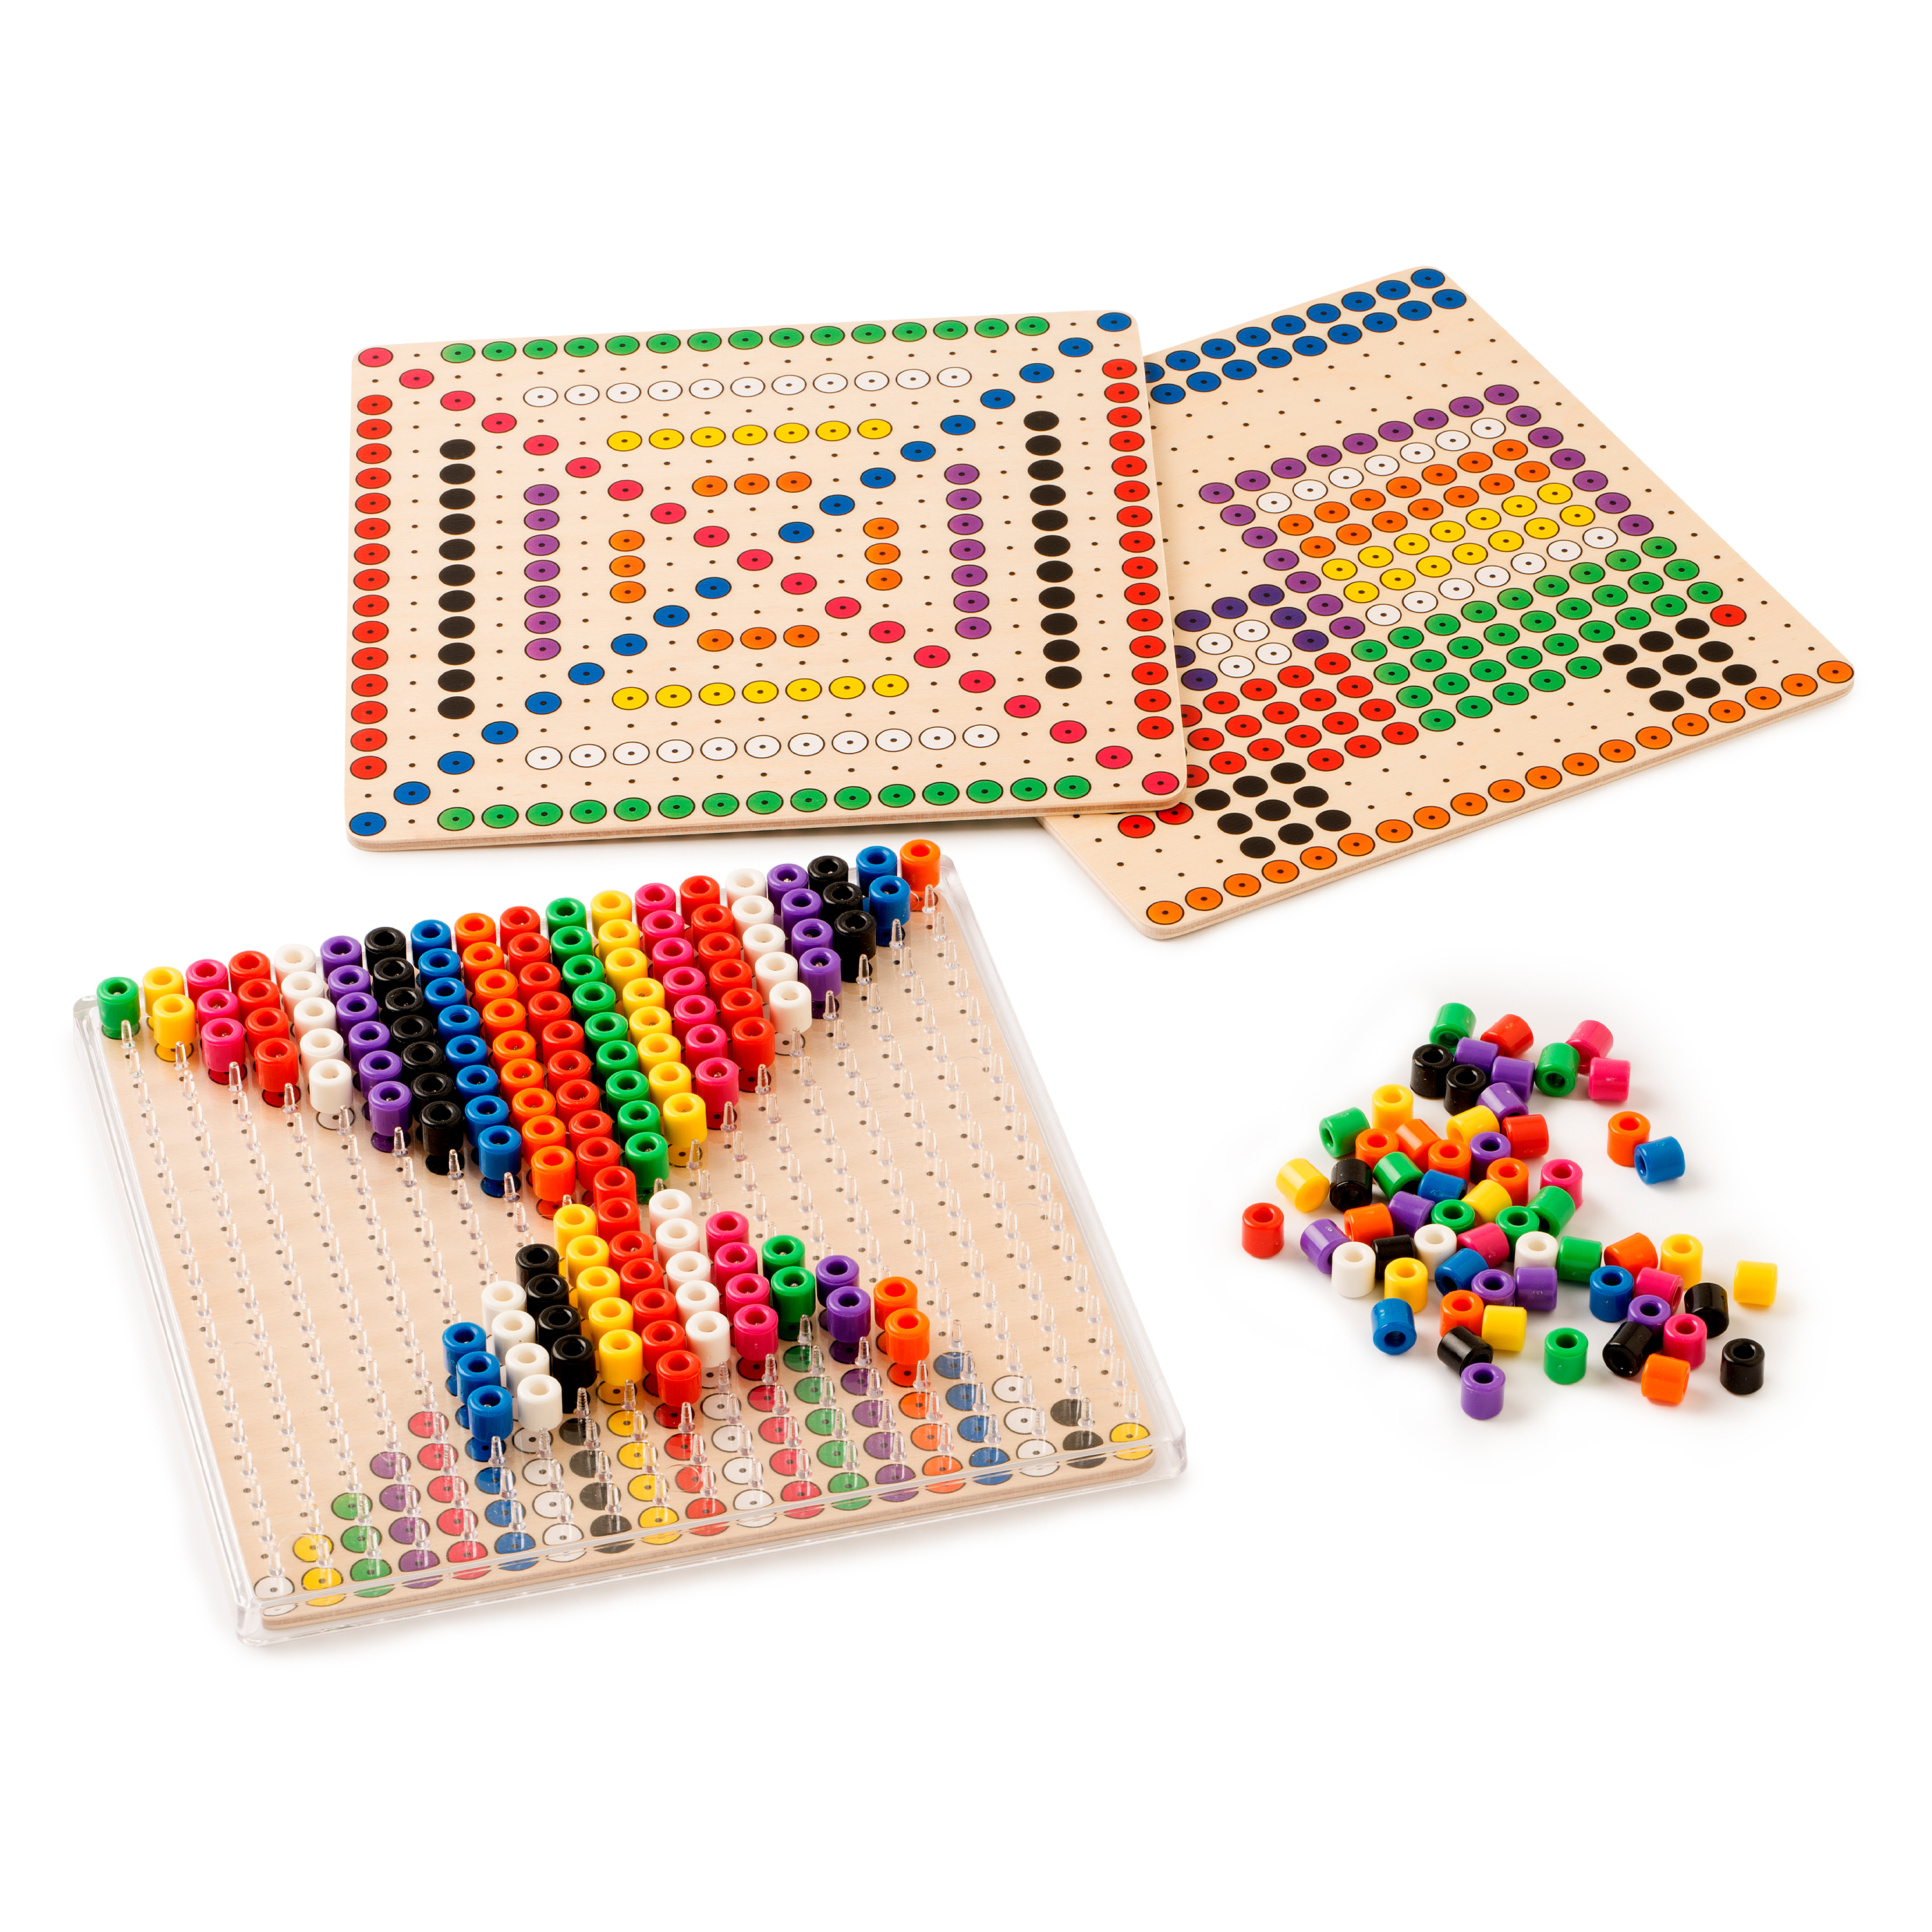 Toys for Life 'Build with beads – Perlenstecken'